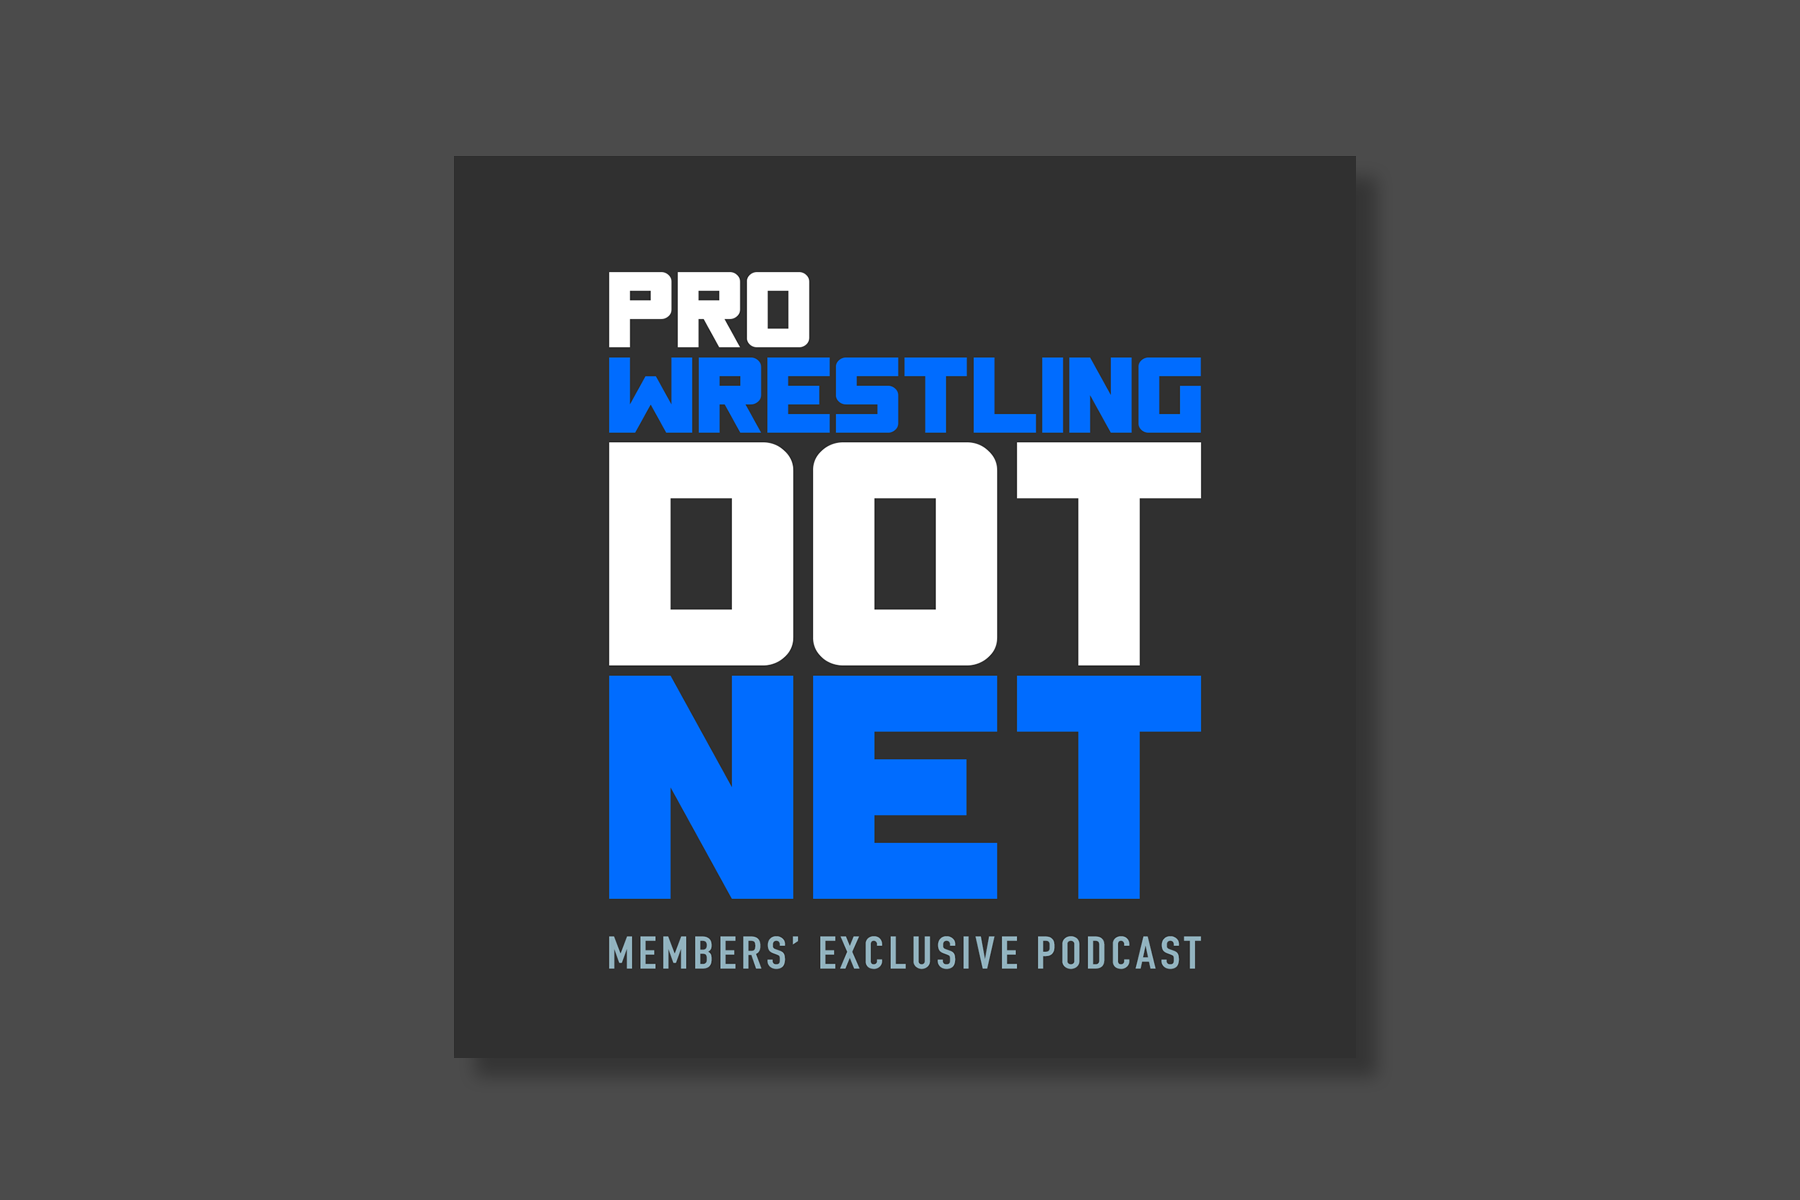 11/30 Dot Net Weekly audio show: Barnett and Powell on CM Punk’s return to WWE, WBD and WWE Raw TV rights rumors, Bandido has a second surgery, AEW Dynamite discussion